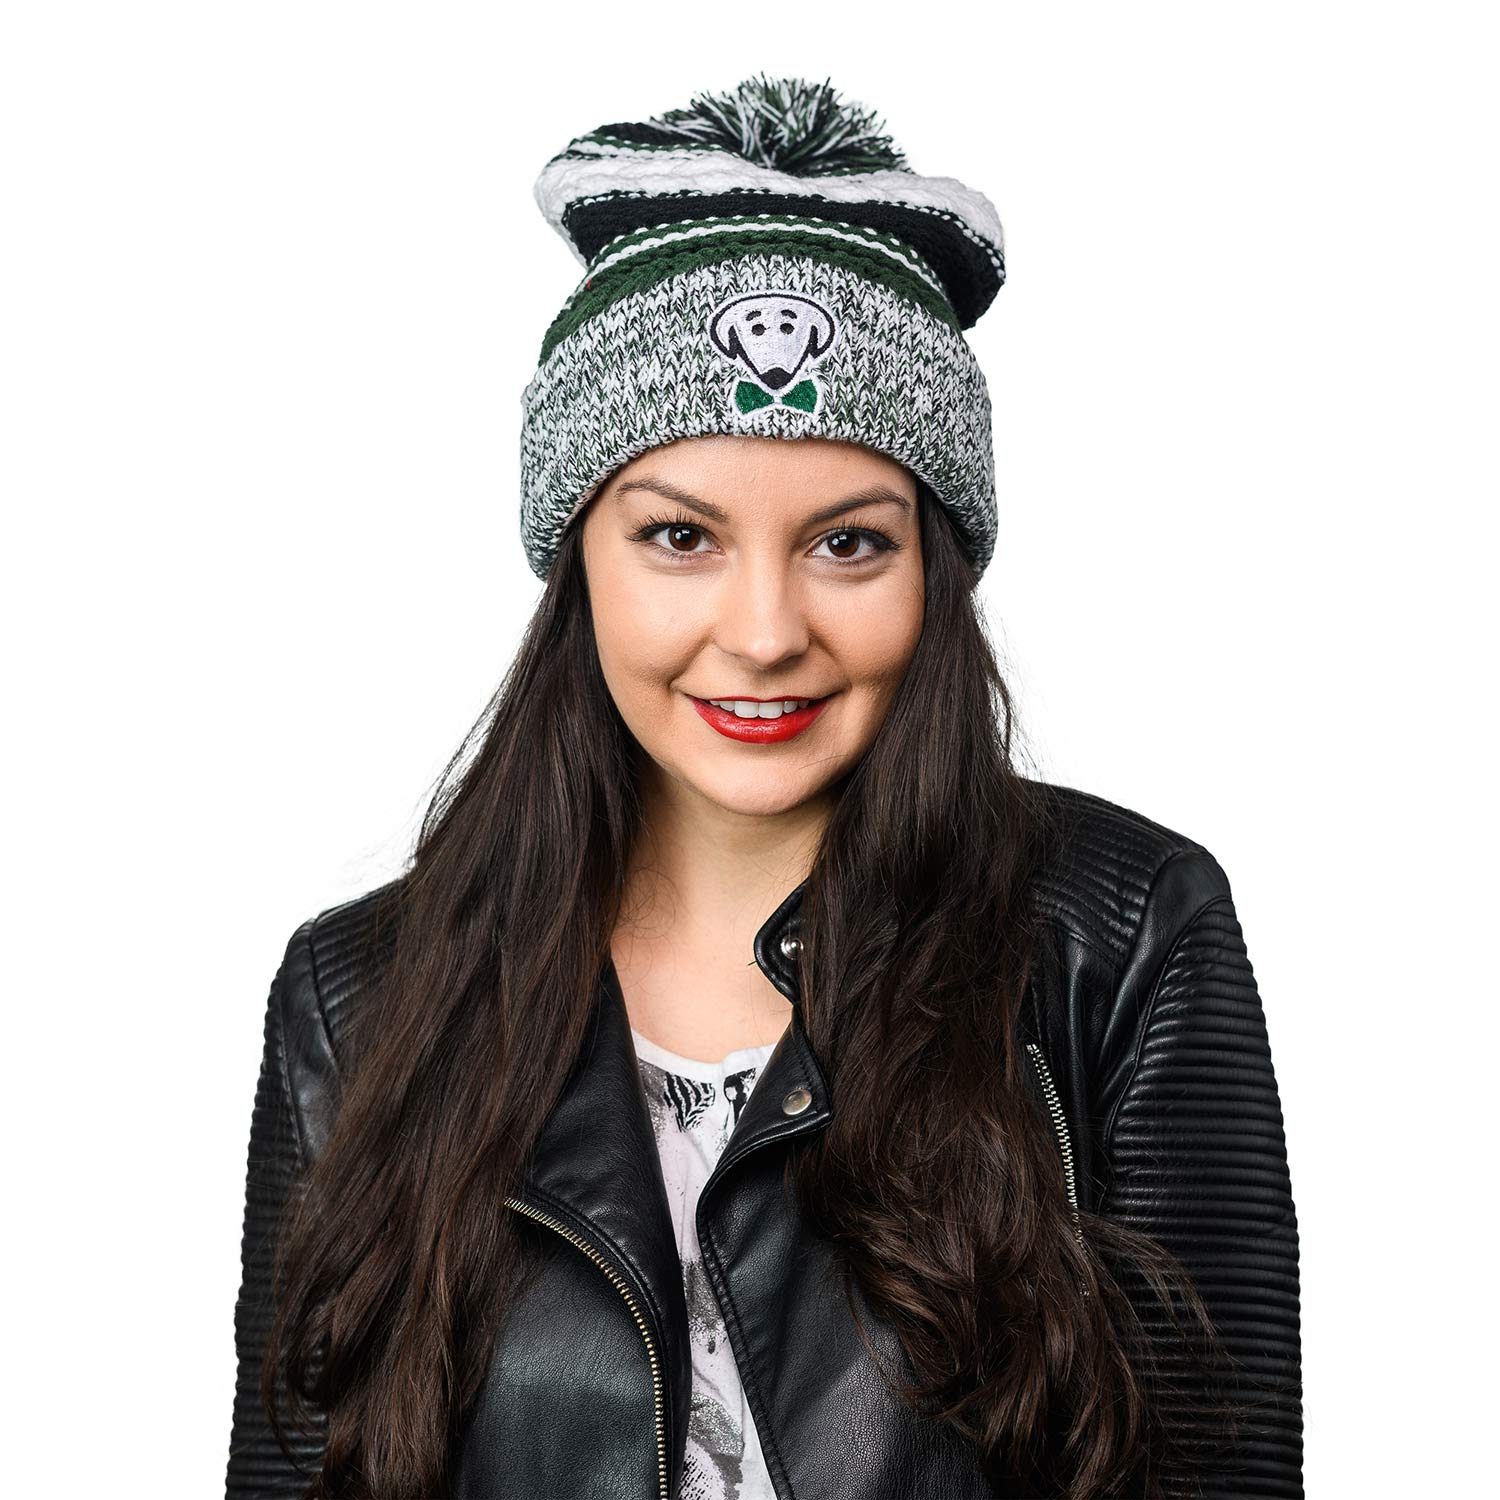 Could she be any cuter?! - Riley winter knit hat by Beau Tyler